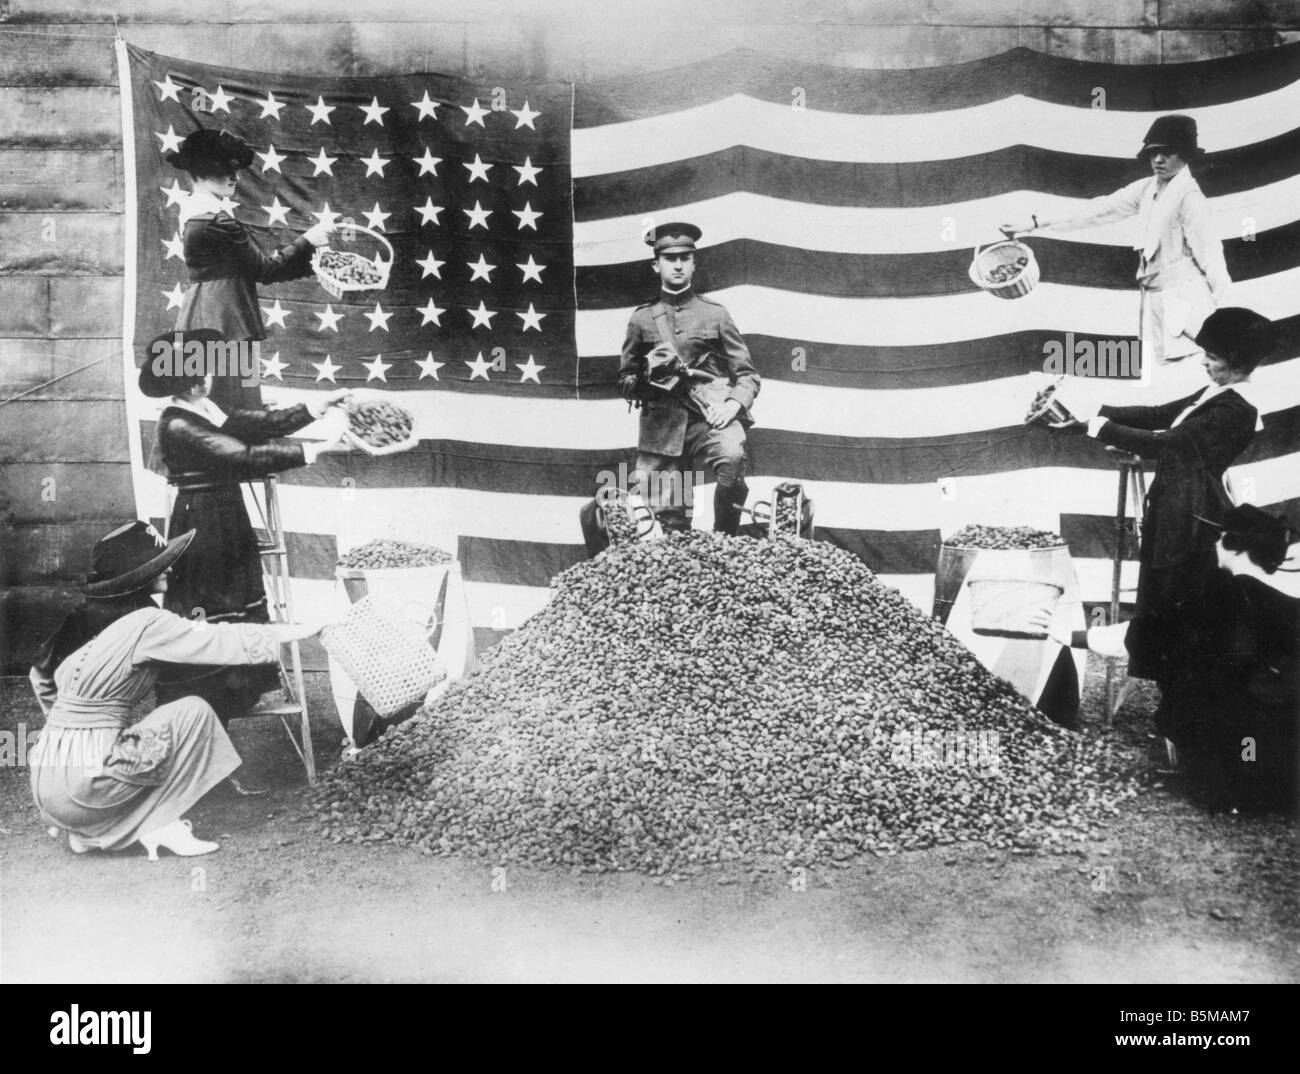 2 G55 W2 1918 4 E Collecting peach stones World War I History World War I War economies USA Women from Boston helping in a campa Stock Photo